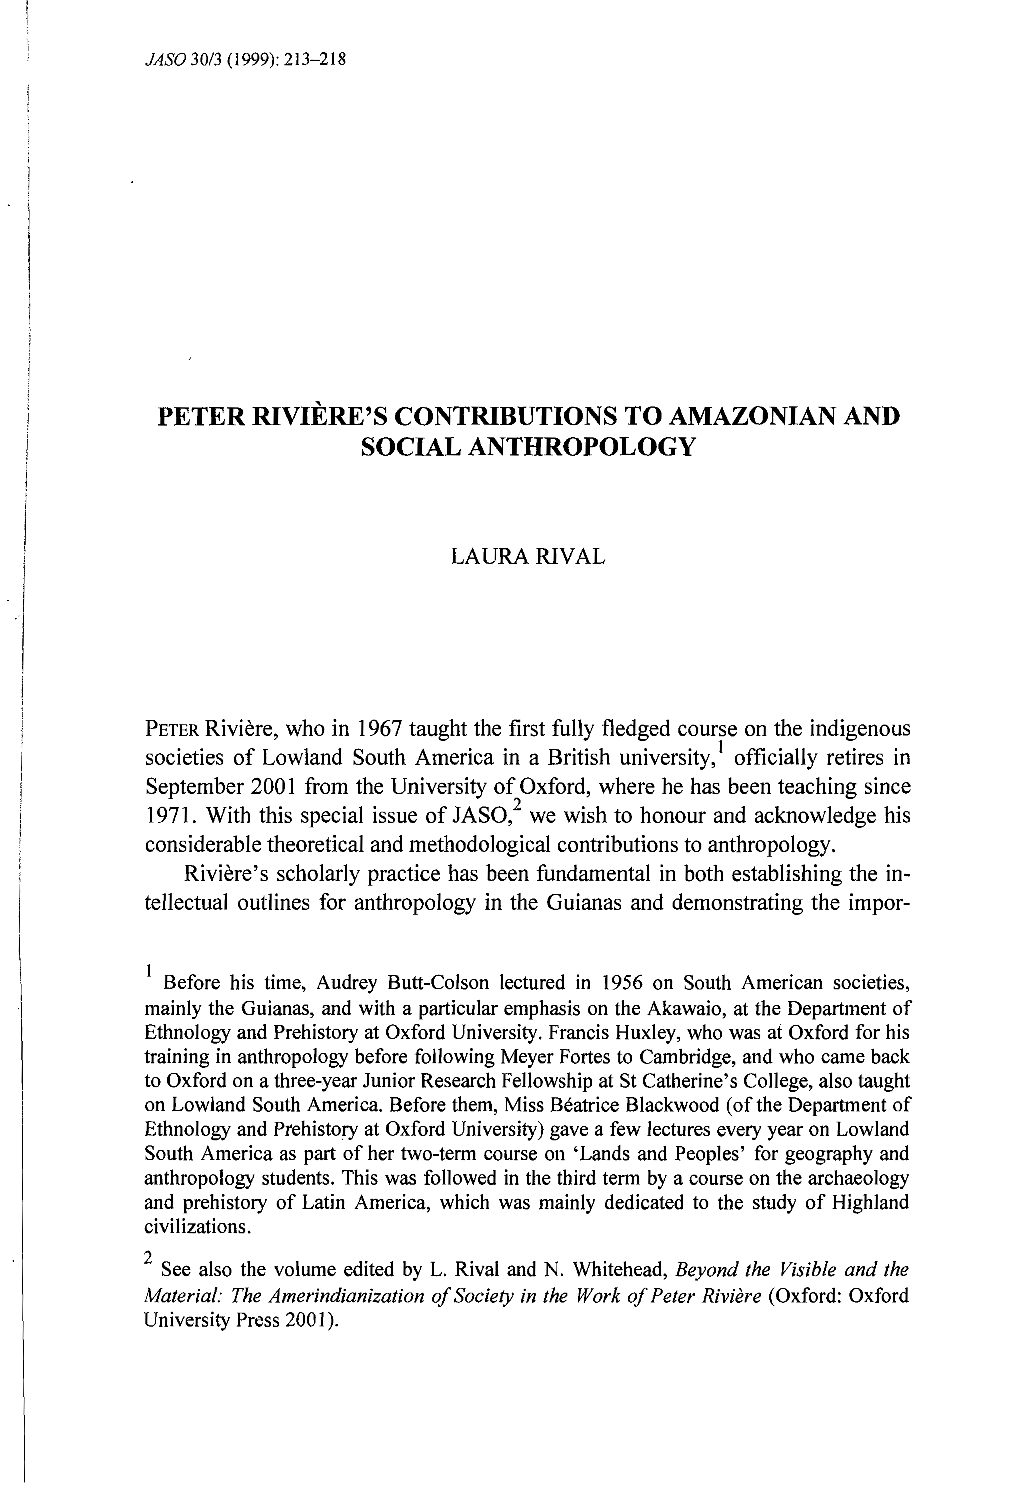 Peter Riviere's Contributions to Amazonian and Social Anthropology